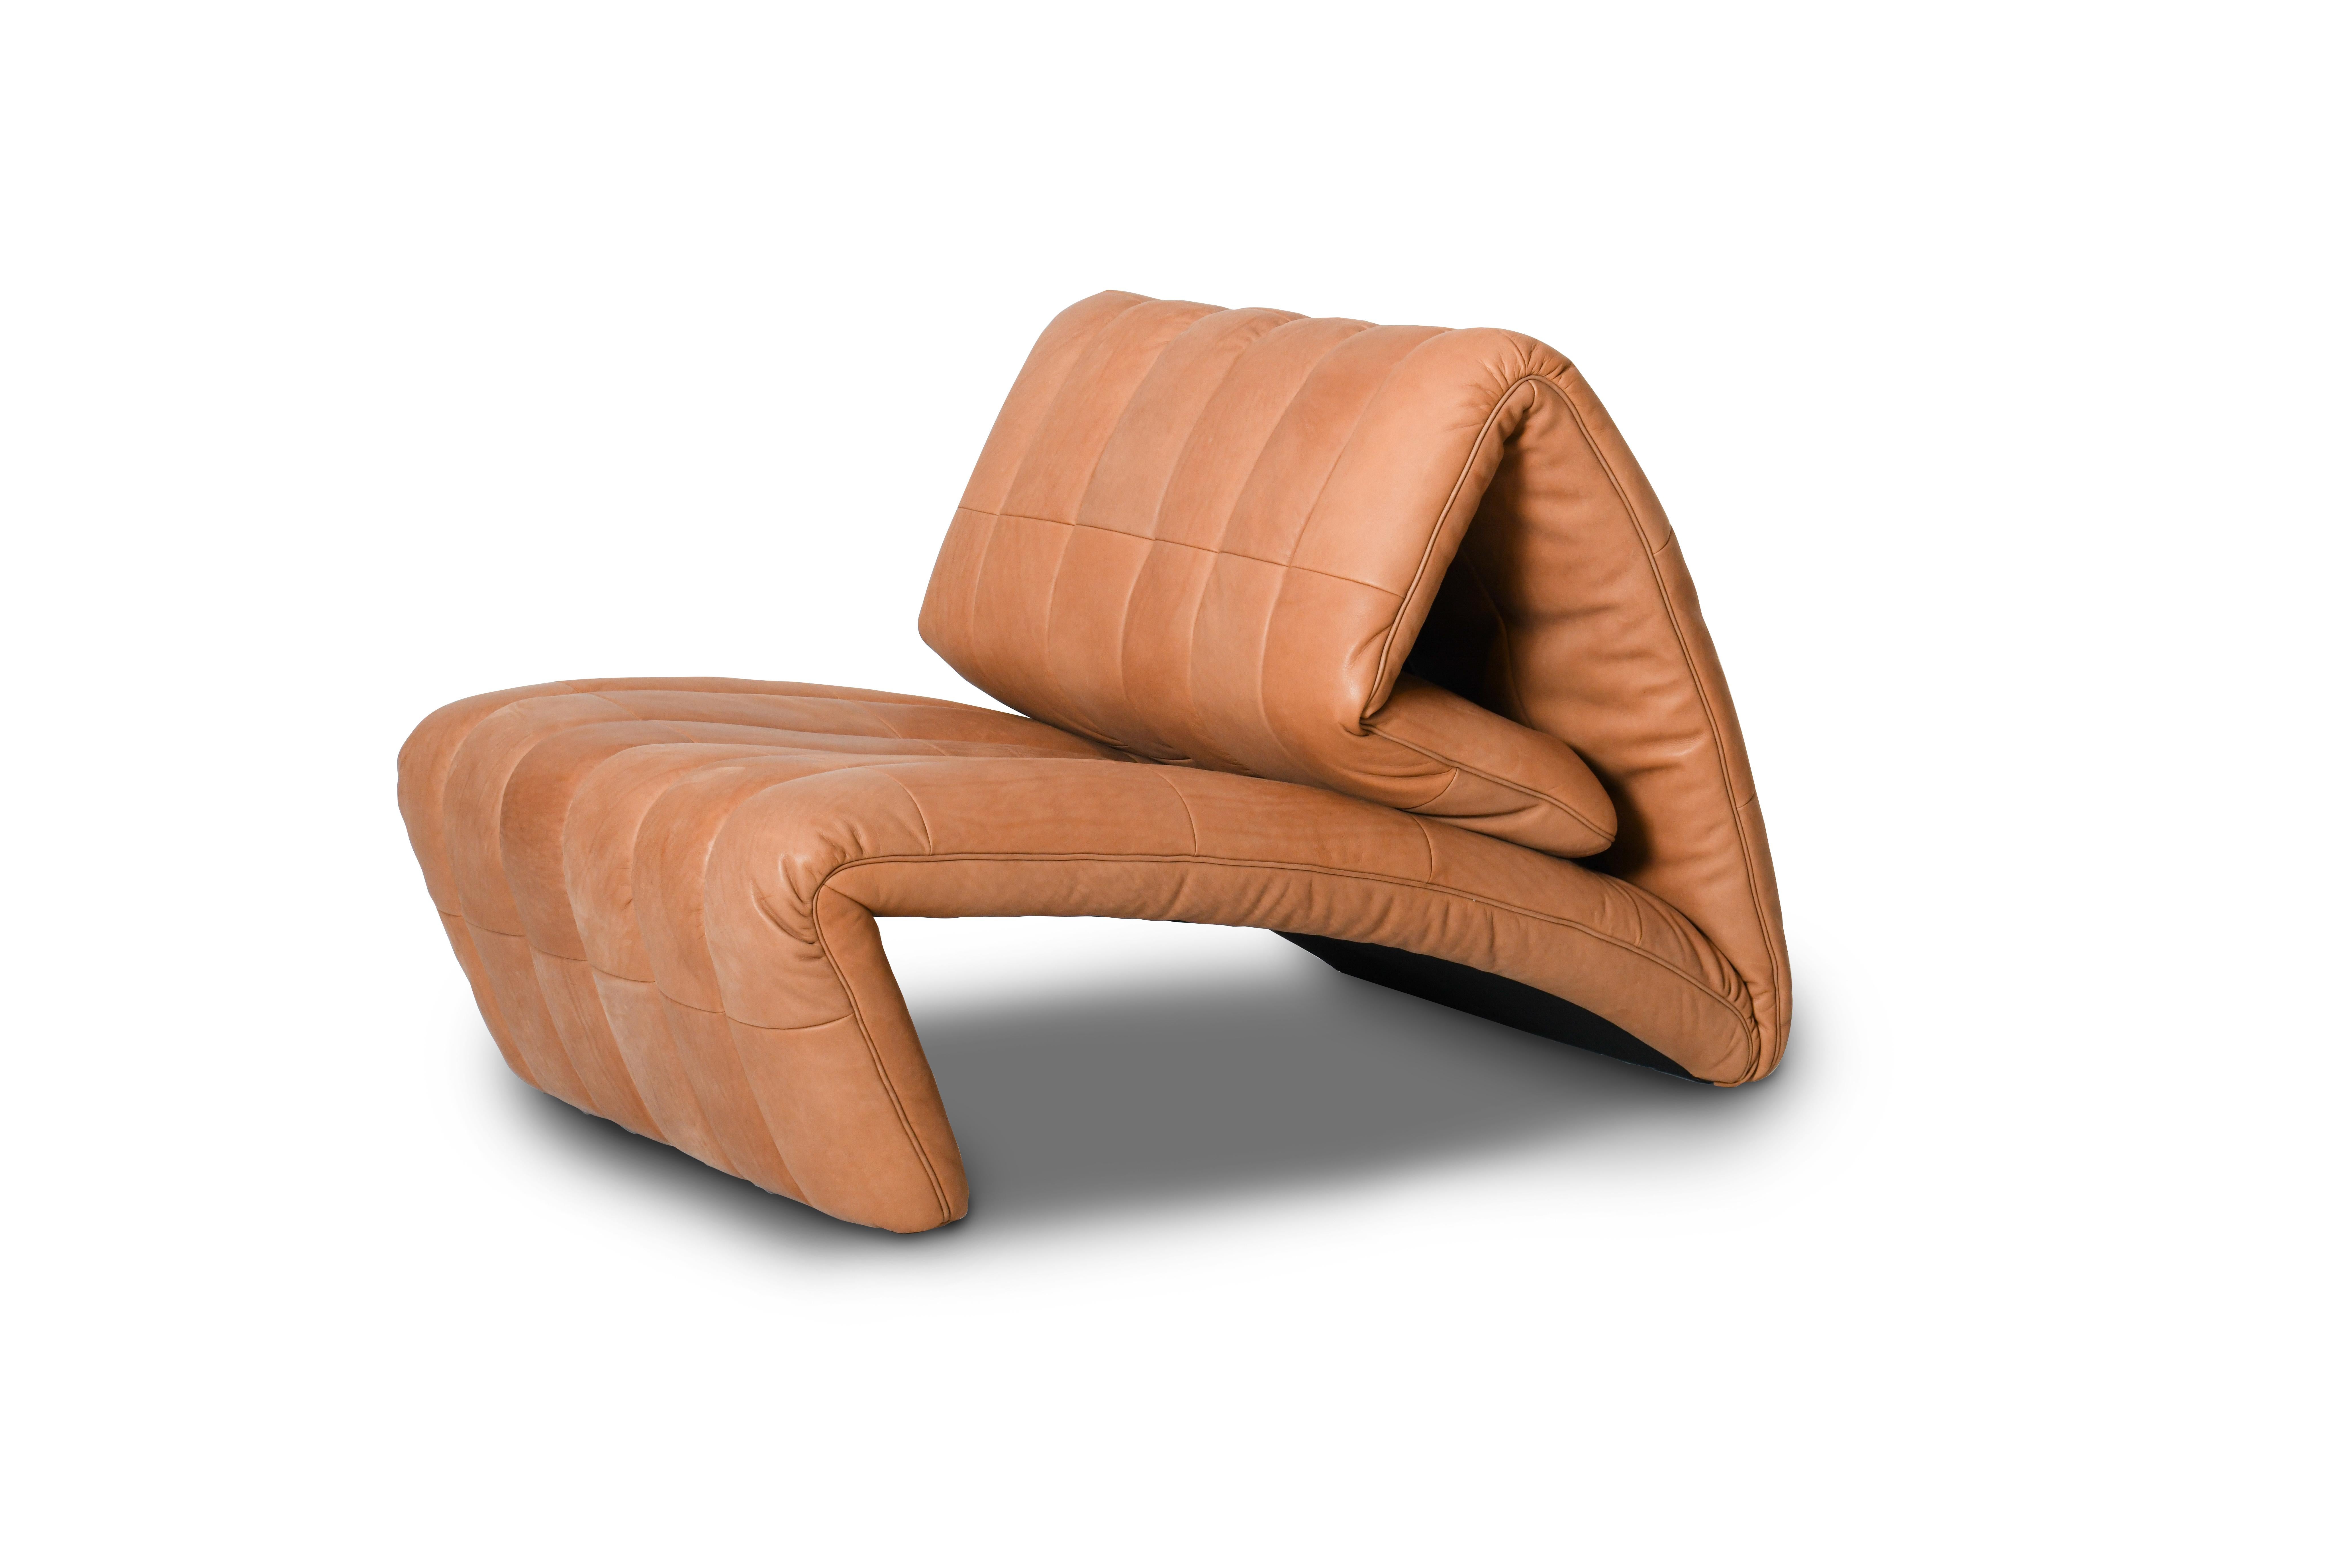 DS-266 seating by De Sede
Dimensions: D 80 x W 156 x H 83 cm
Materials: leather

Prices may change according to the chosen materials and size. 

Geometric form and the simplest function
 
A seat suddenly turns into a comfortable recliner –